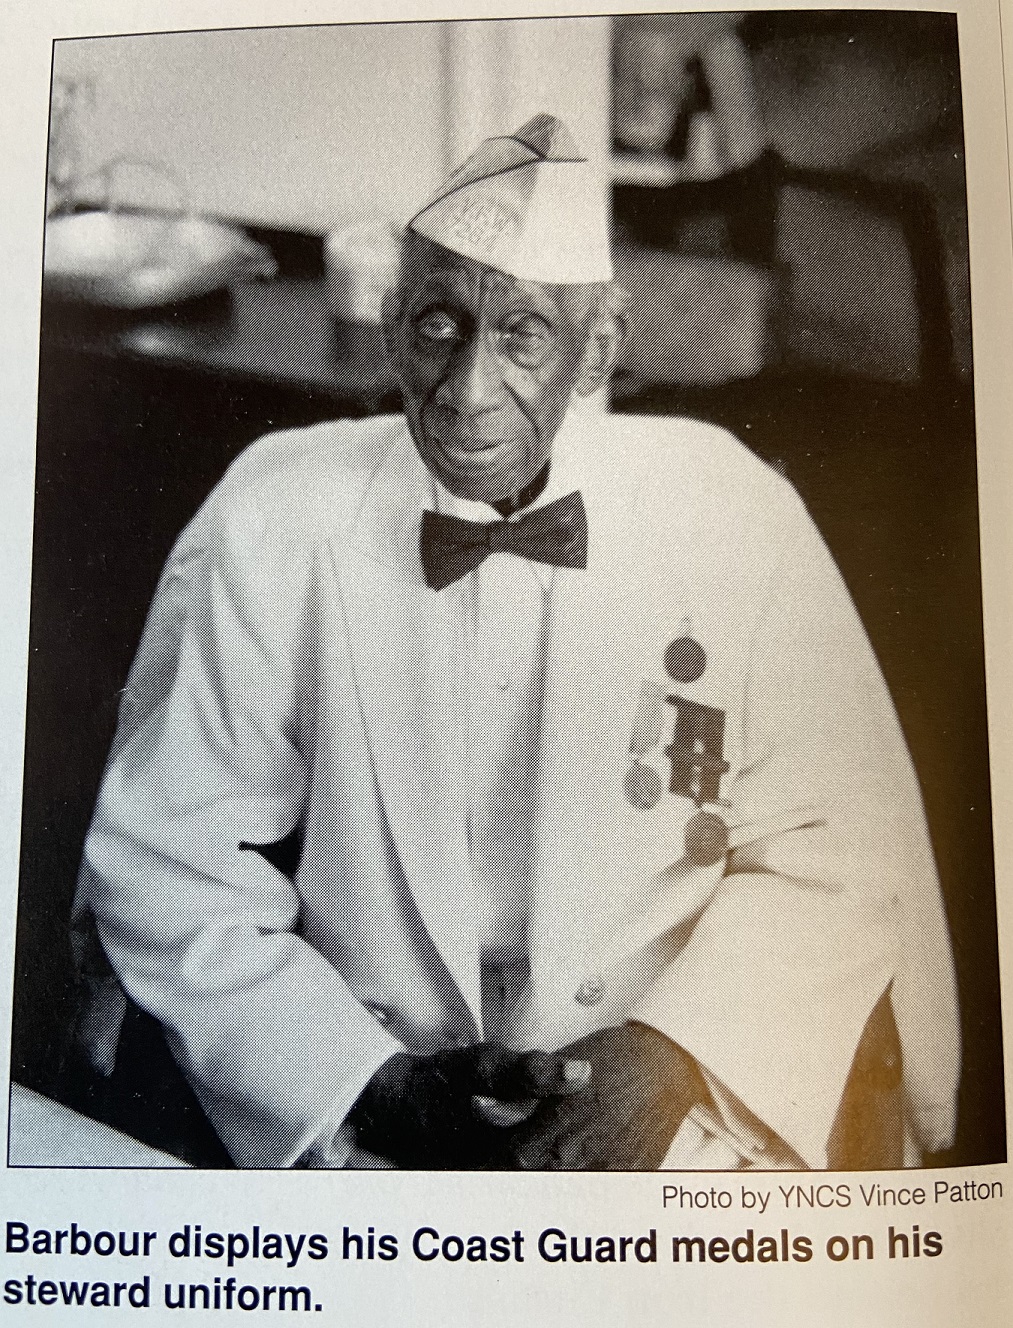 Commissary Steward First Class Alphonzo F. Barbour dressed in his steward uniform including medals he received during his Coast Guard career. (Courtesy of Vince Patton)